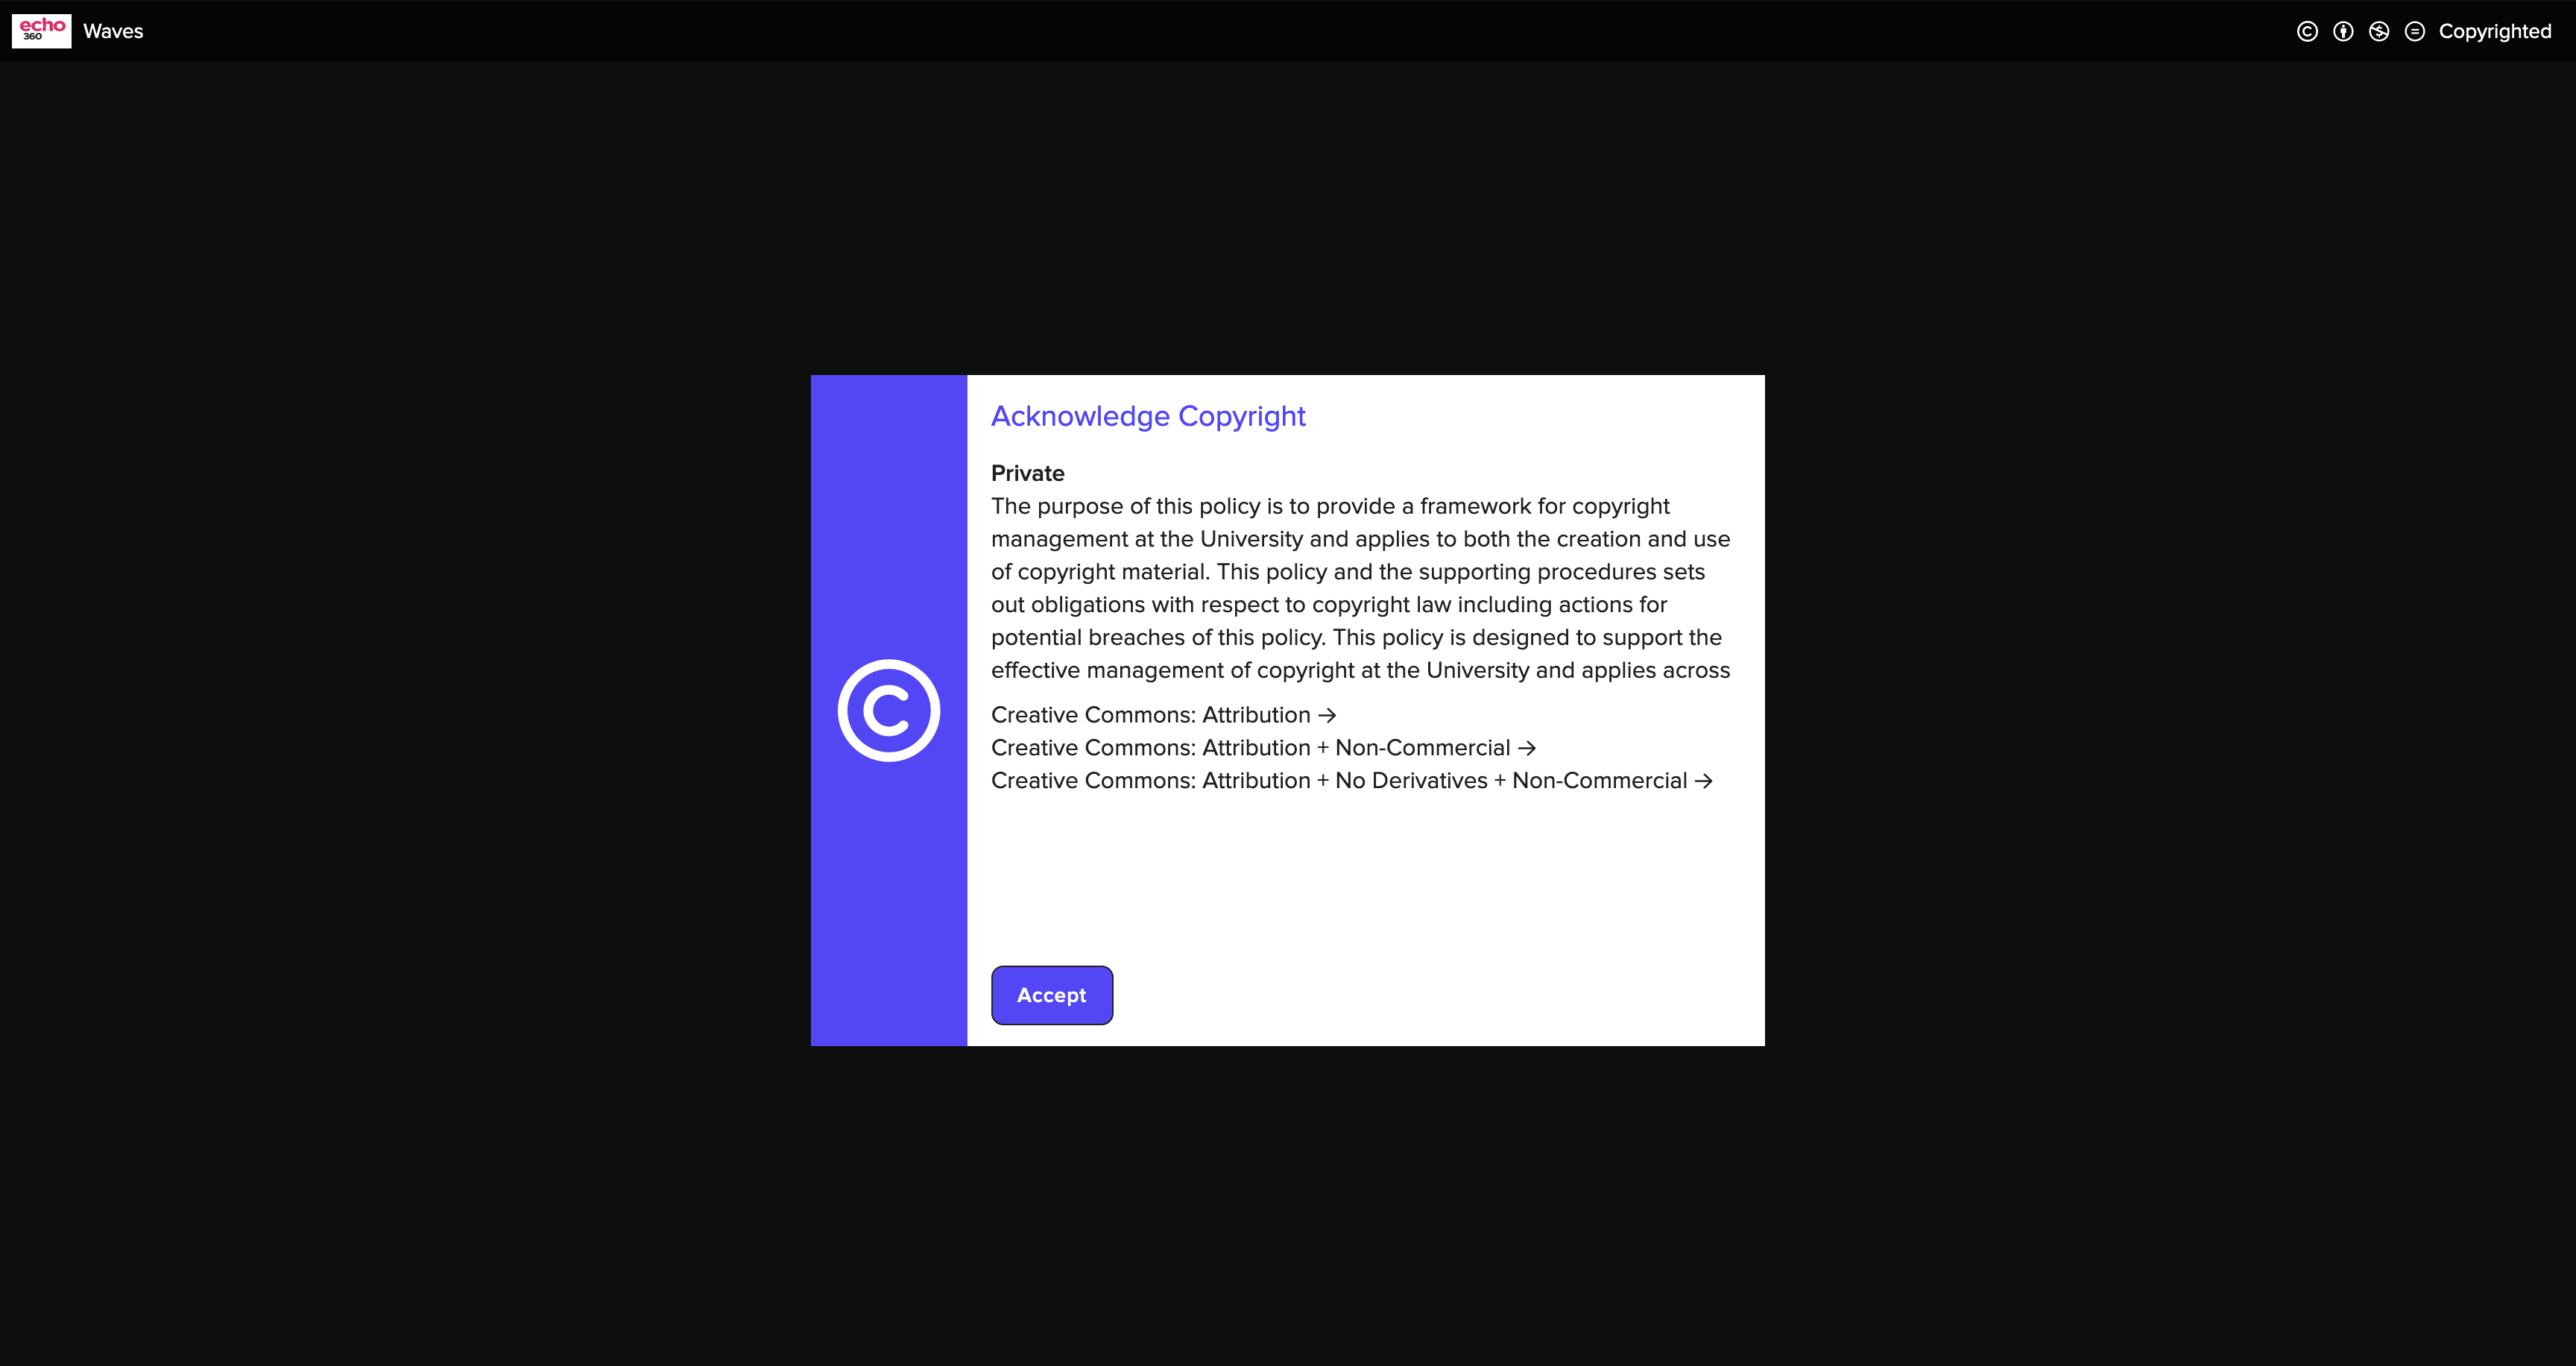 Echo Player showing Copyright Acknowledgement as described